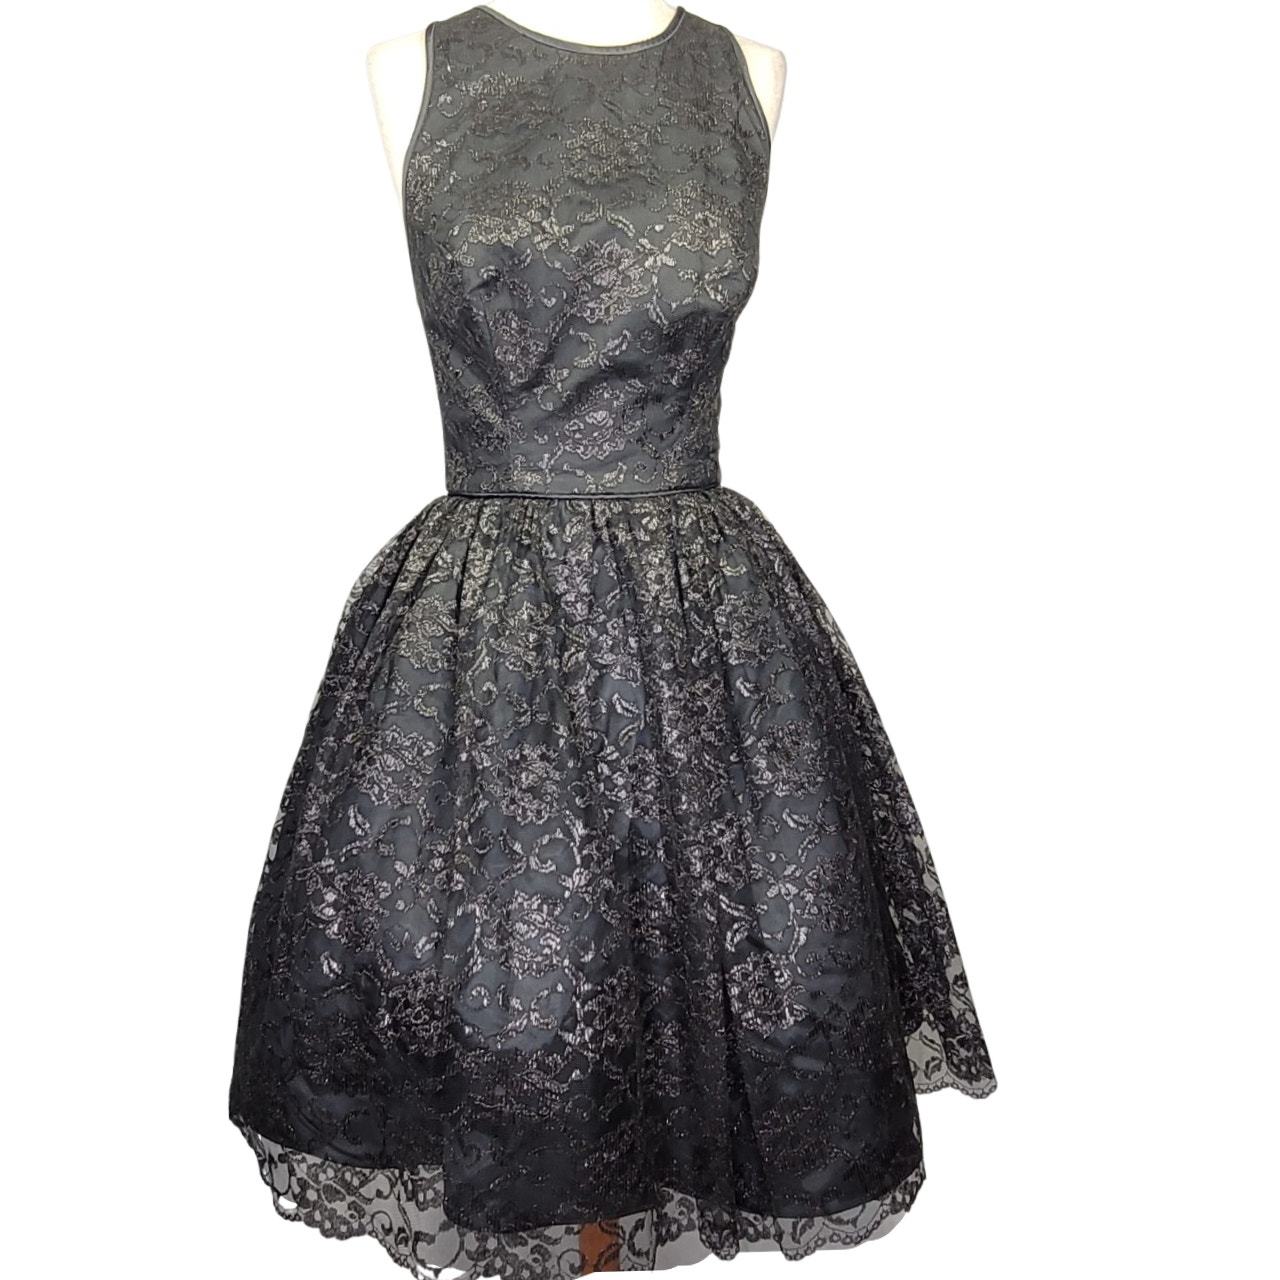 Primary image for Maggy London Black Metallic Mini Cocktail Dress Size 6 